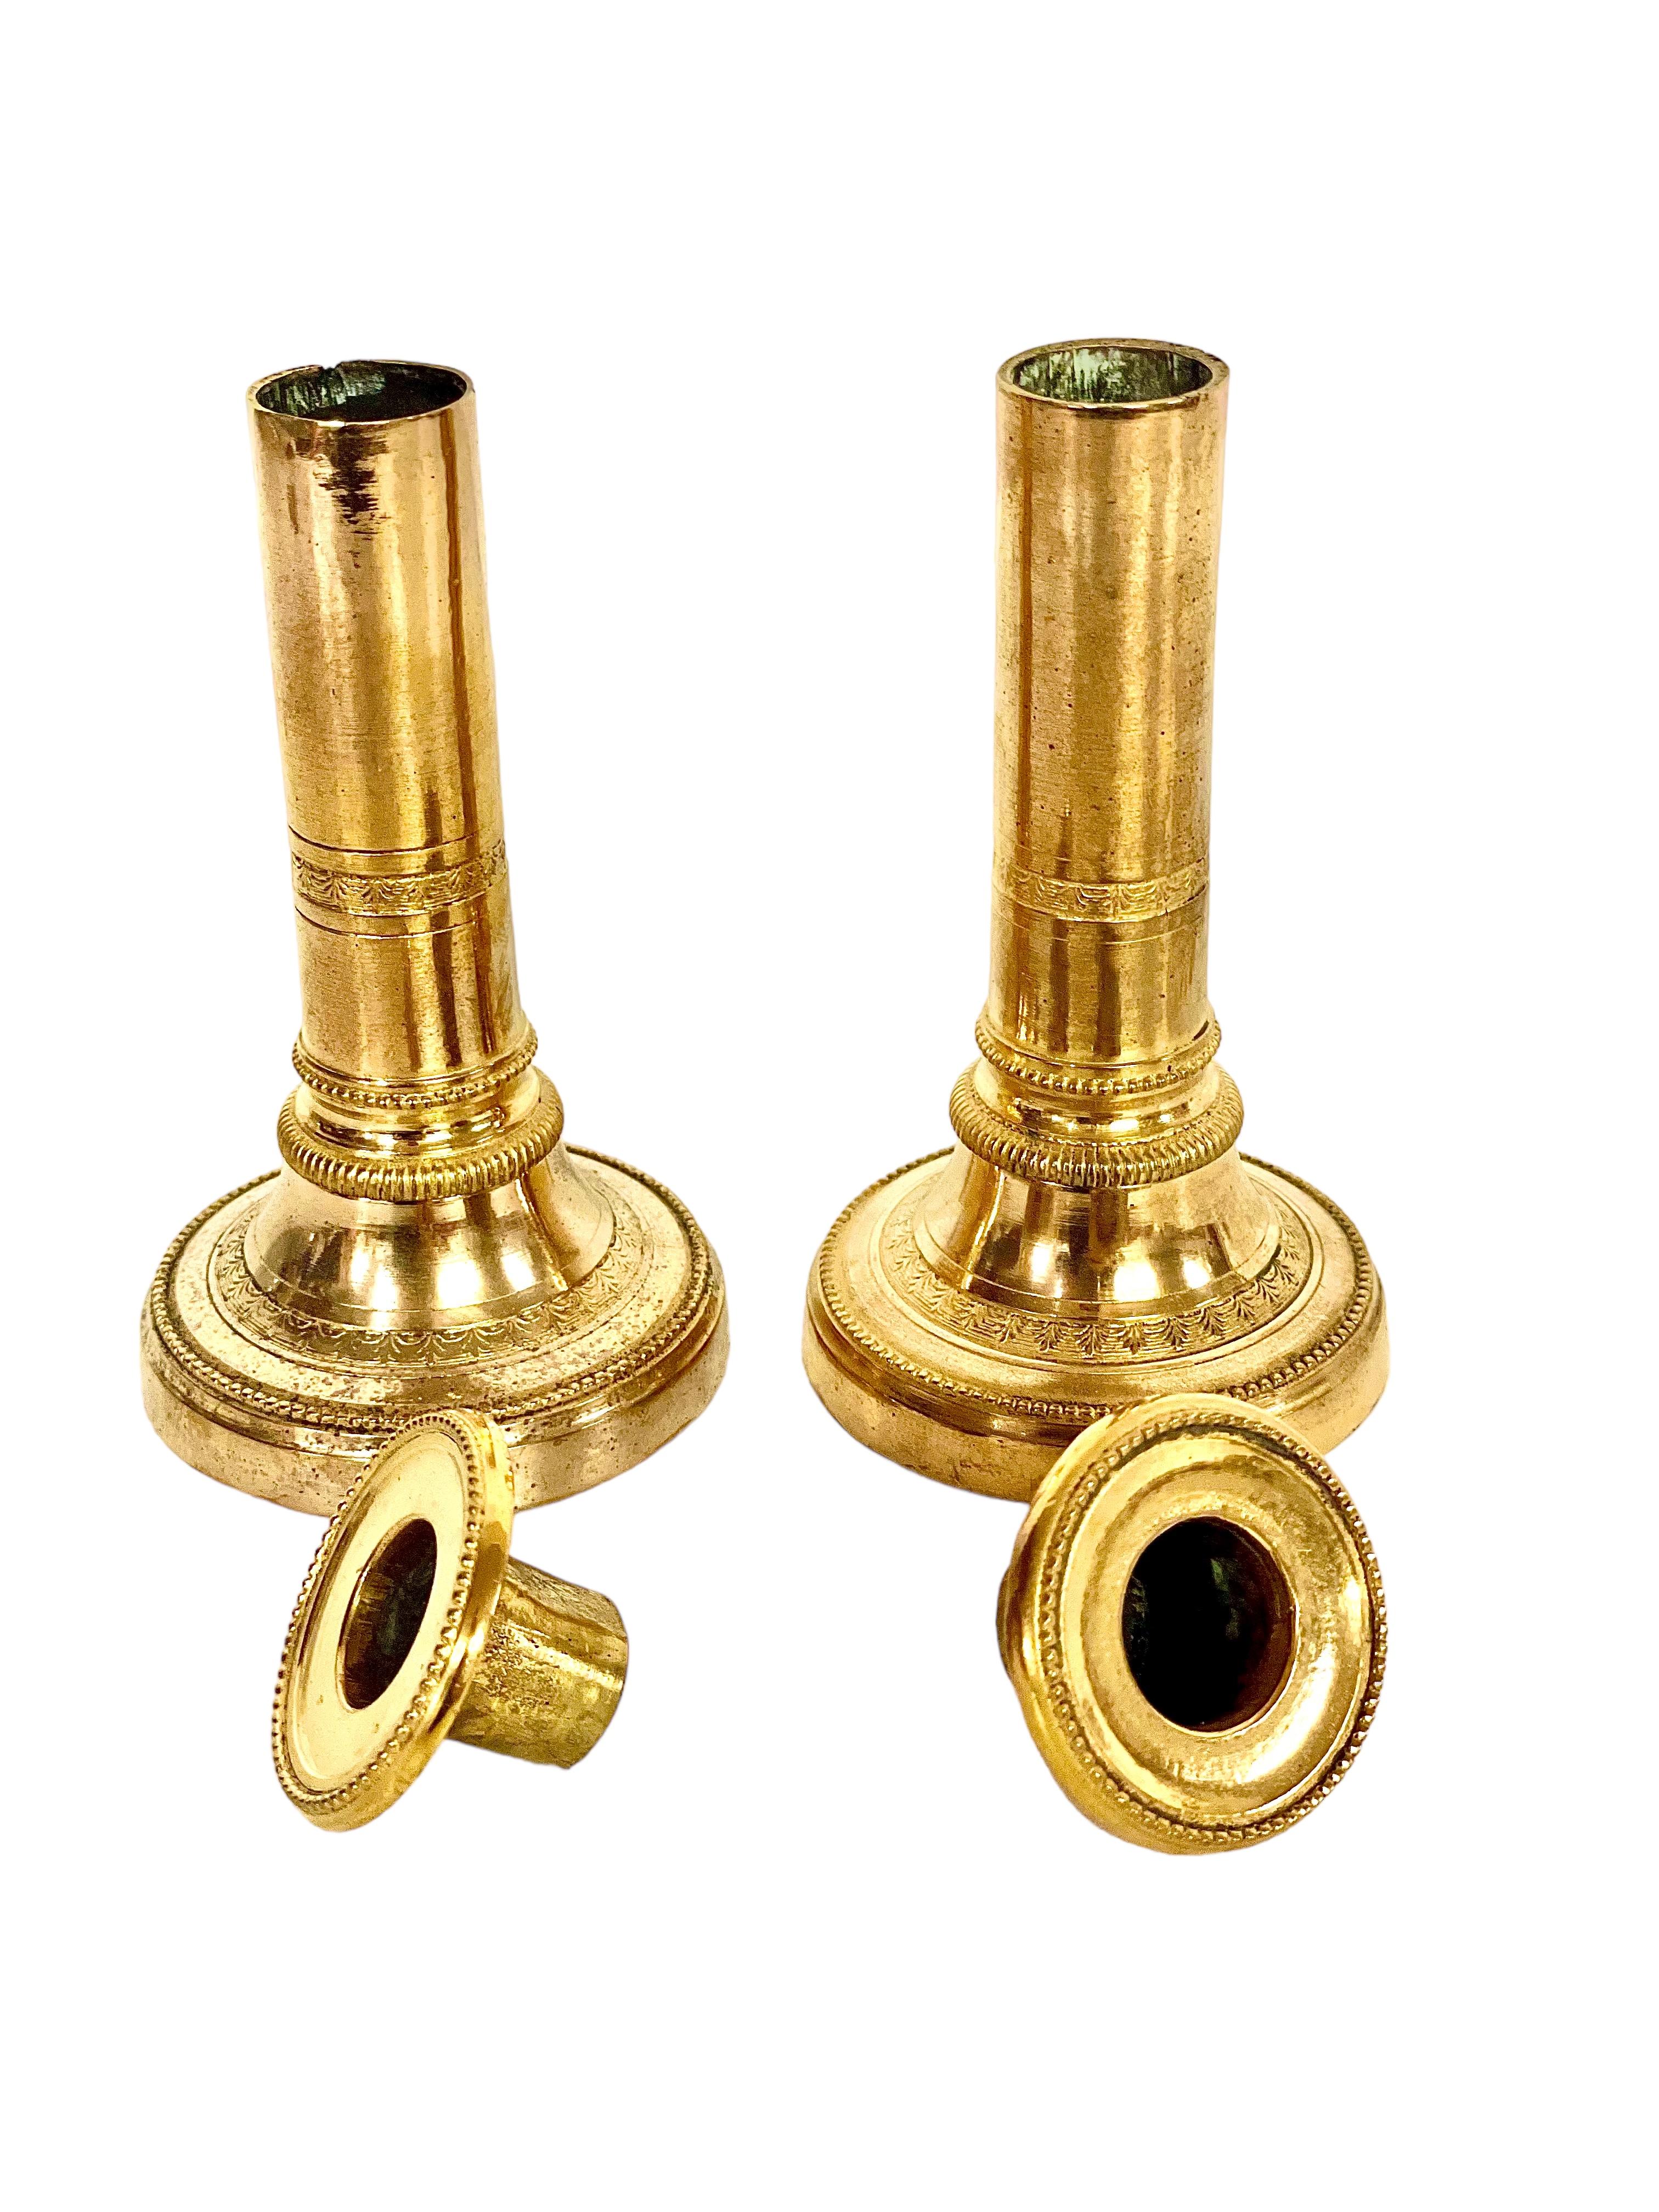 French  Petite Pair of Gilt Bronze Candlesticks. 19th Century For Sale